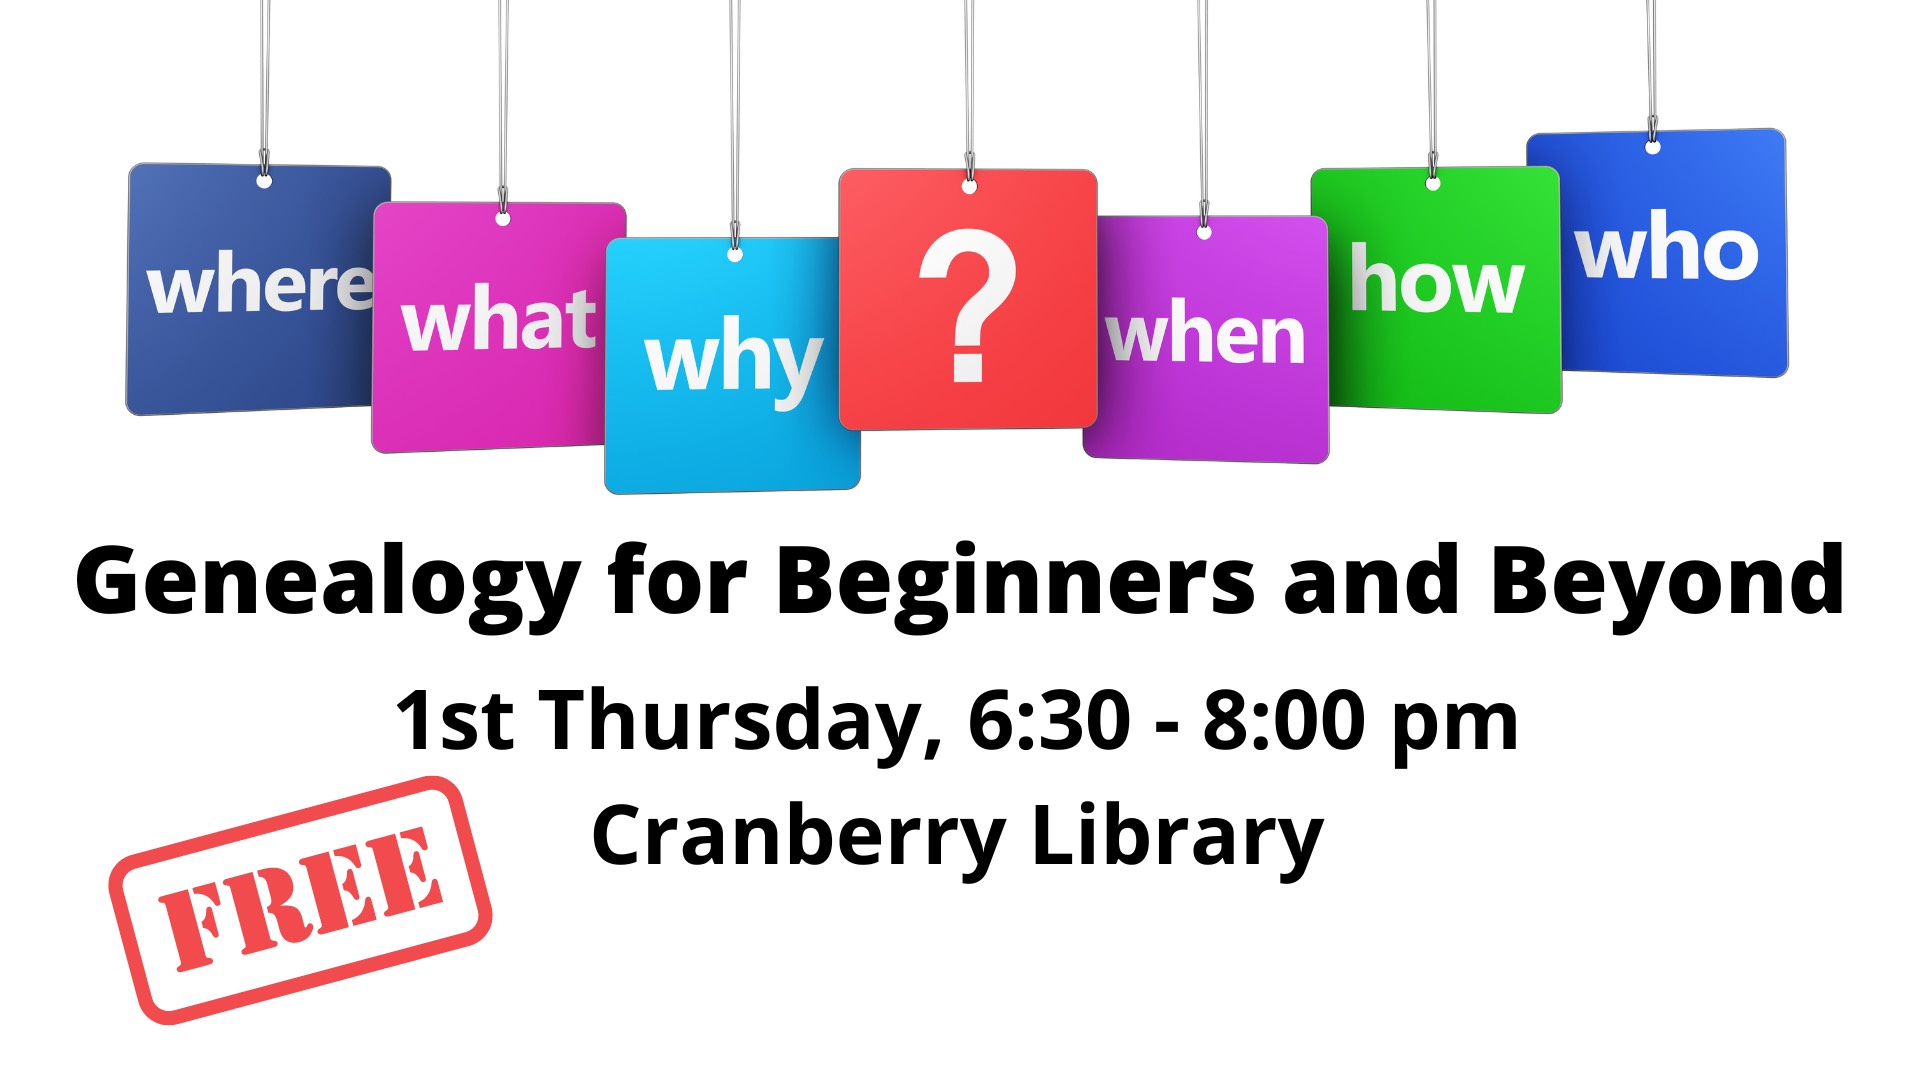 Flyer for Genealogy for Beginners and Beyond workshop